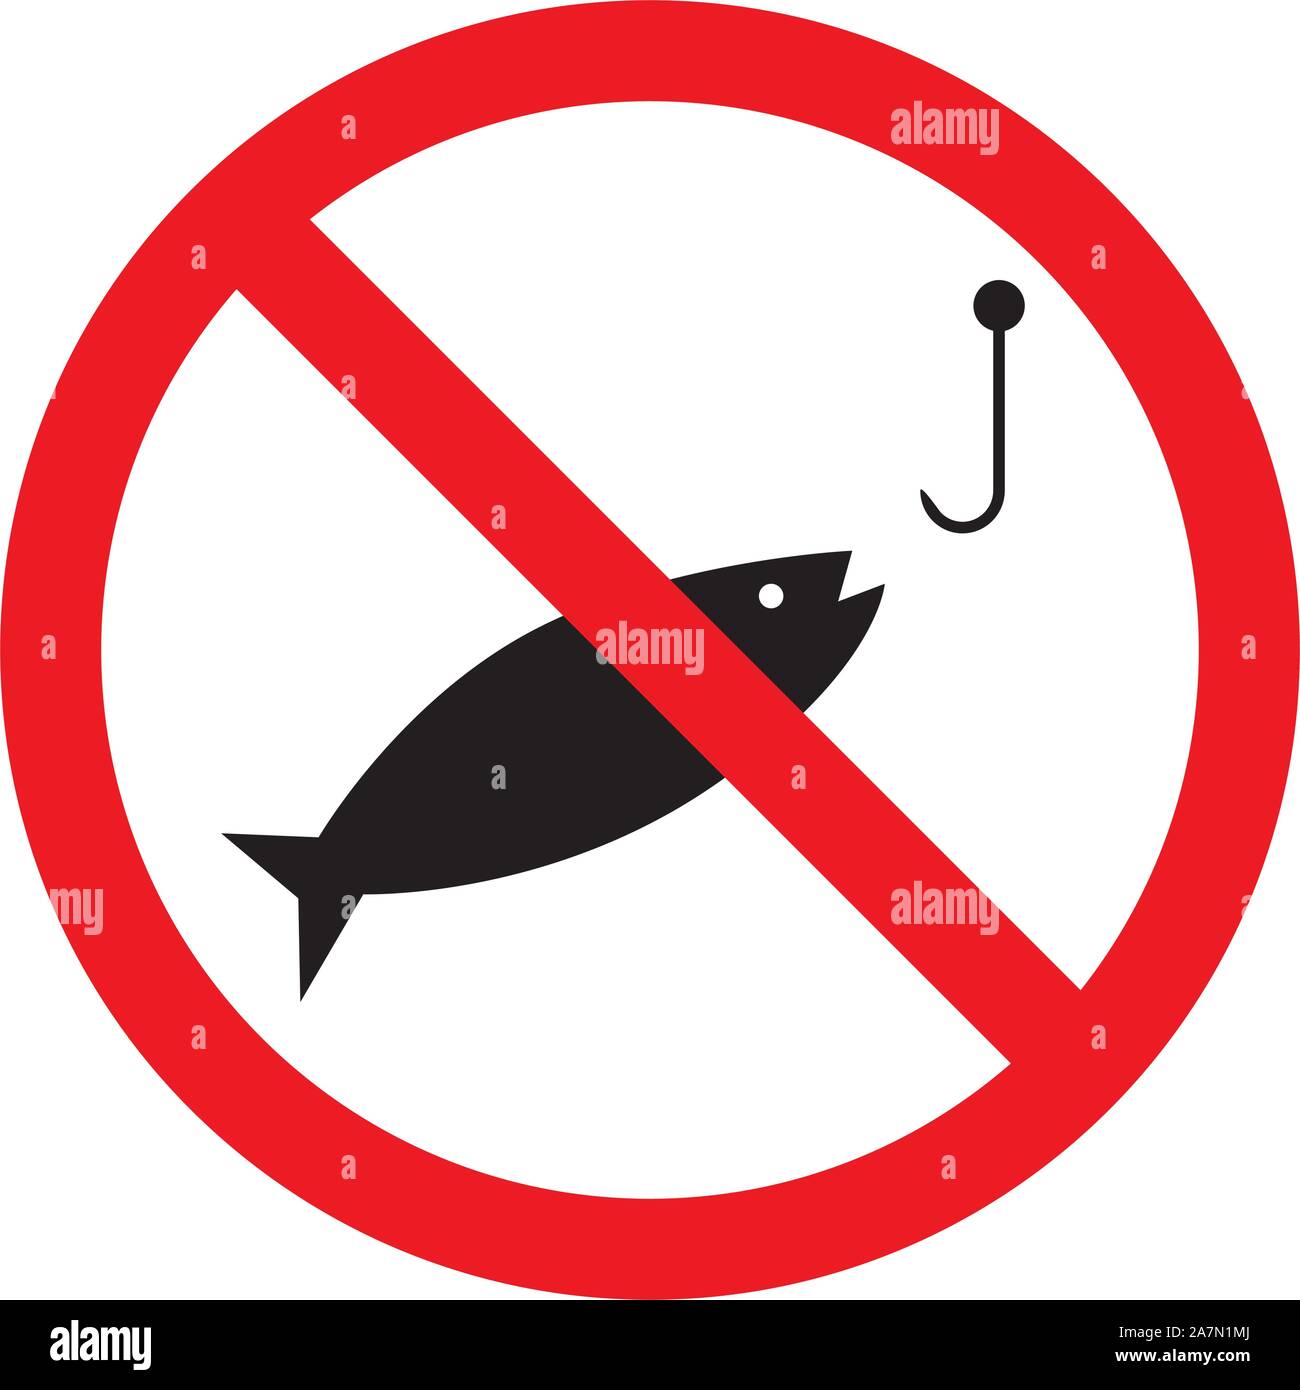 No fishing sign vector illustration. Not allowed prohibited caution symbol. Red circle. Stock Vector